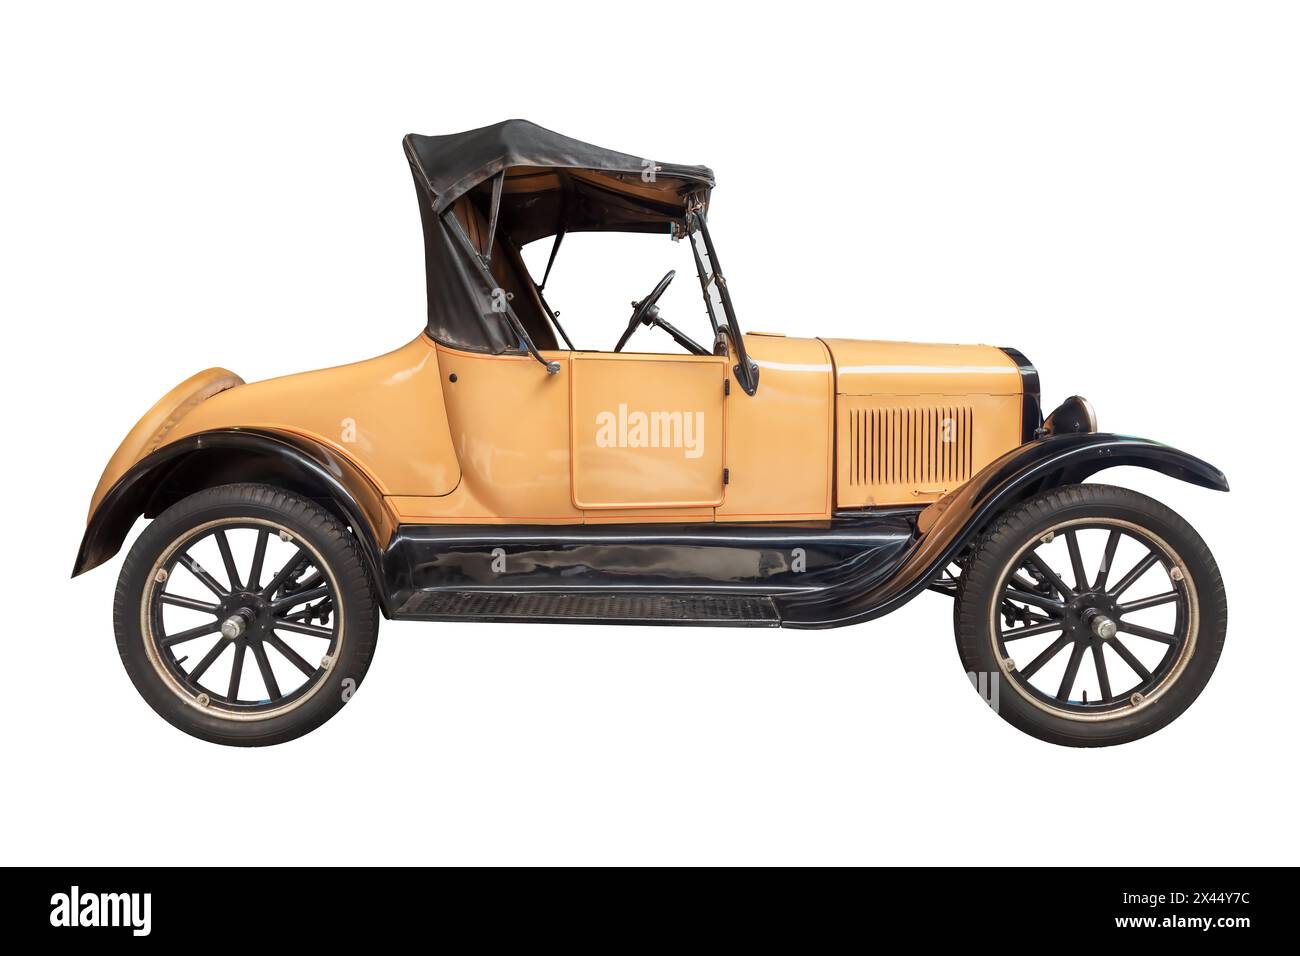 Side view of an early twentieth century American car isolated on a white background Stock Photo